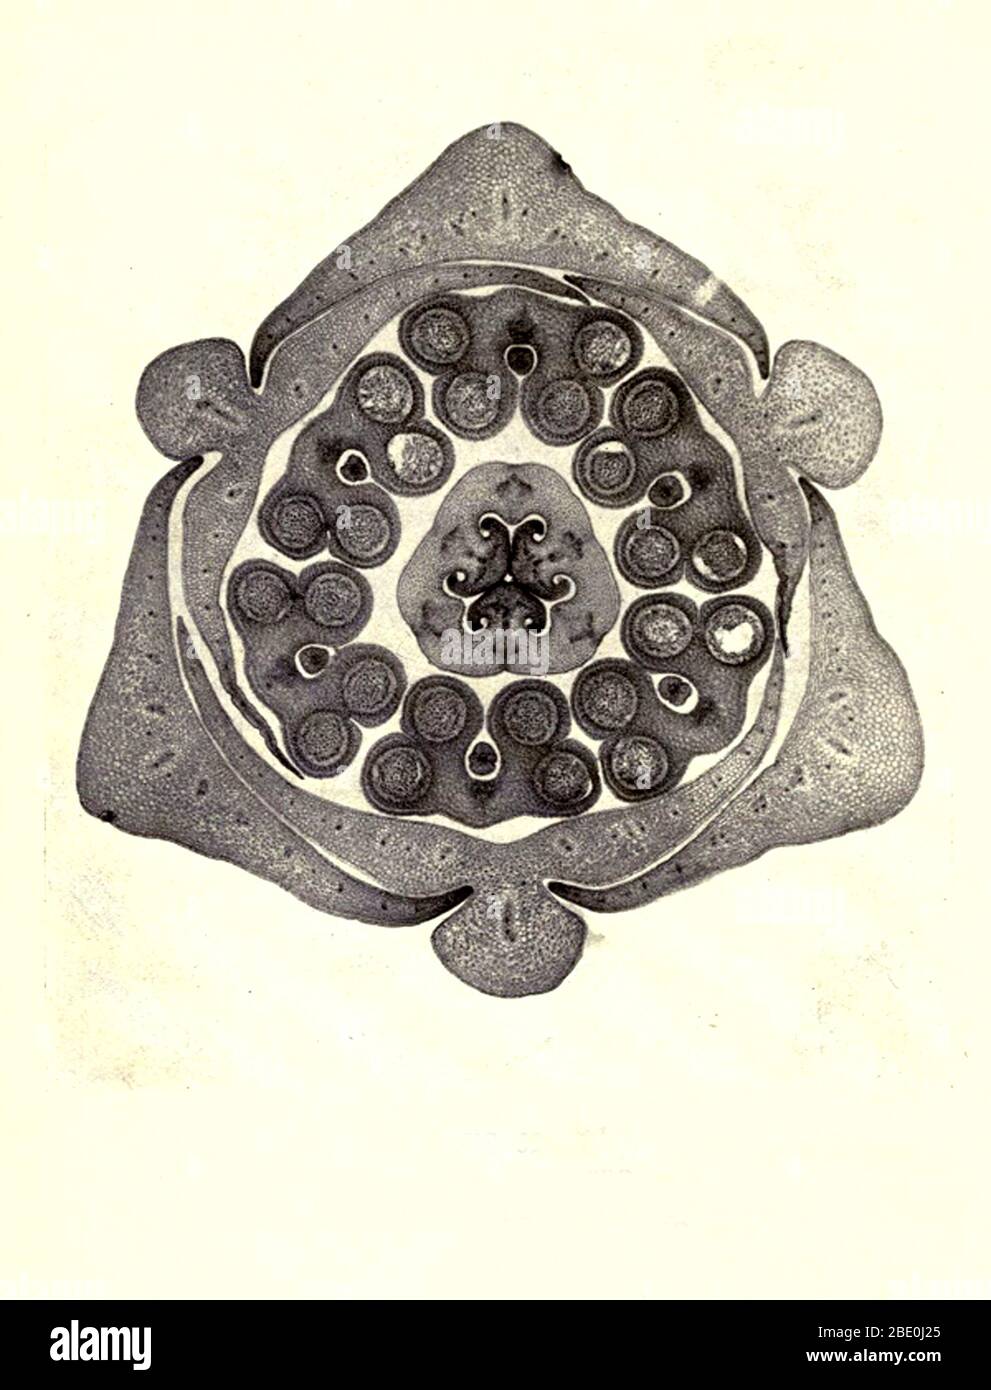 Section of Lily bud. Magnification: 12x. Photomicrograph made by Arthur E Smith in the early 1900s, using a combined microscope and camera. In 1904, the Royal Society in London exhibited a series of Smith's photomicrographs to the public. They were later published in 1909 in a book called 'Nature Through Microscope & Camera.' They were the first examples of photomicroscopy many had ever seen. Stock Photo